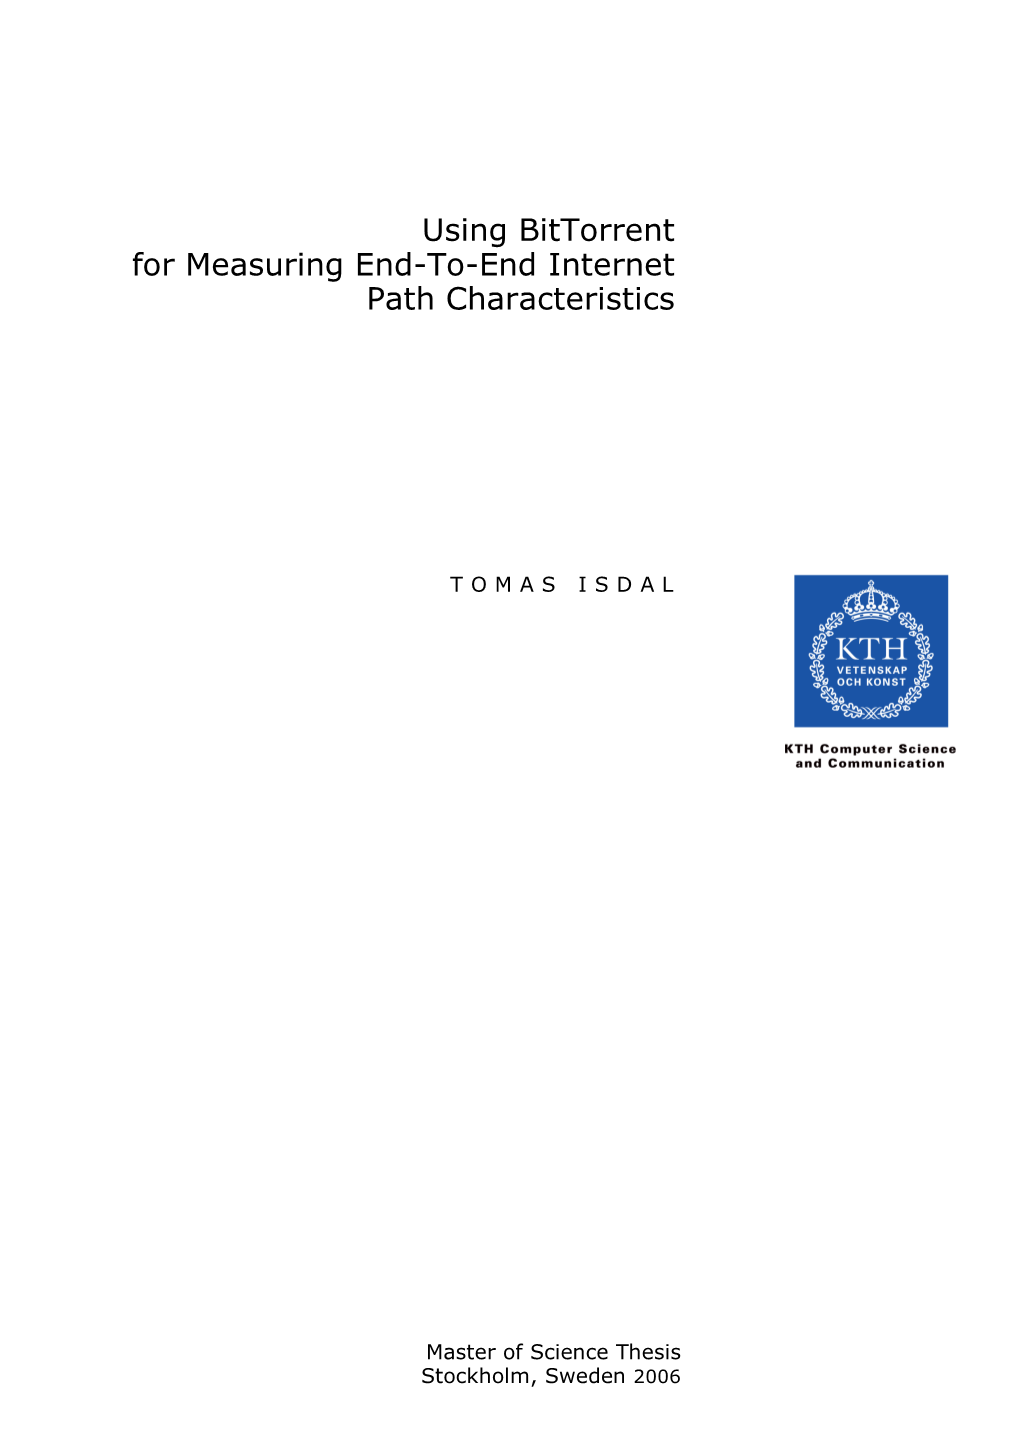 Using Bittorrent for Measuring End-To-End Internet Path Characteristics